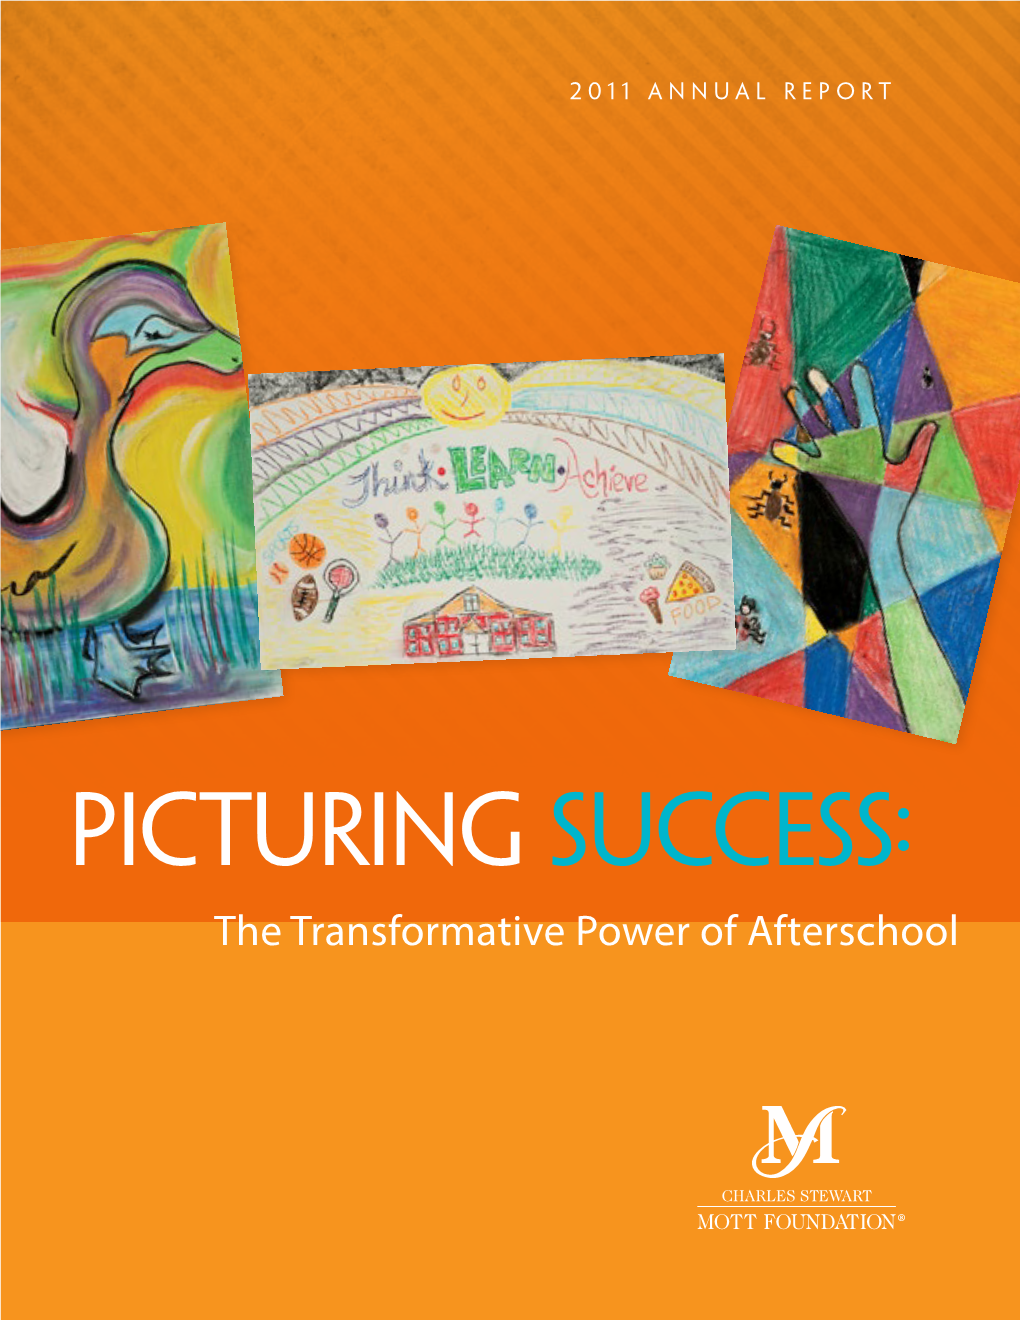 2011 Annual Report Picturing Success: the Transformative Power